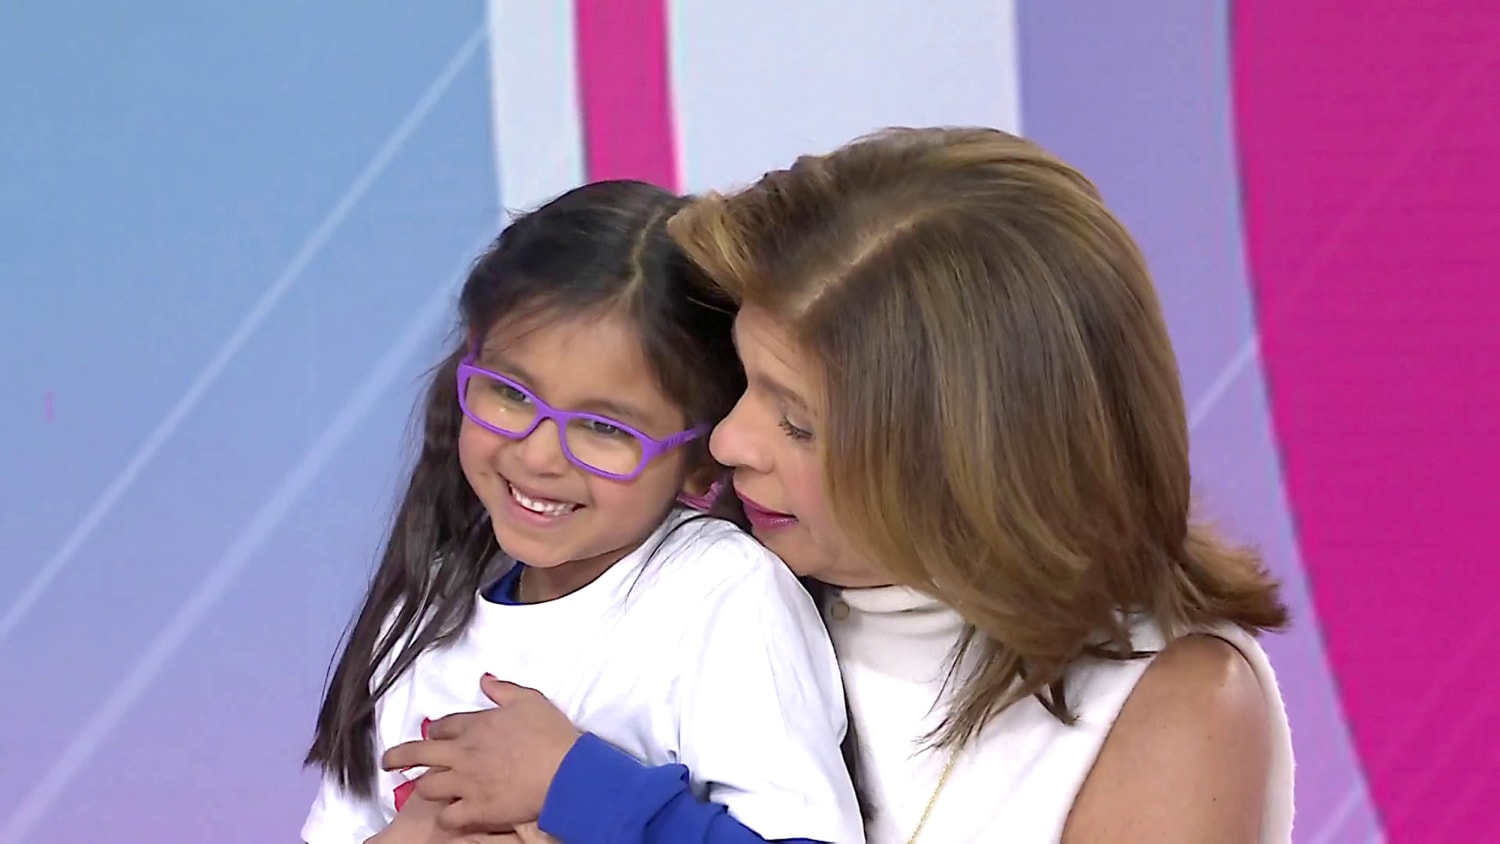 Hoda Kotb brings her daughter Haley's class to the TODAY Show for the ultimate field trip